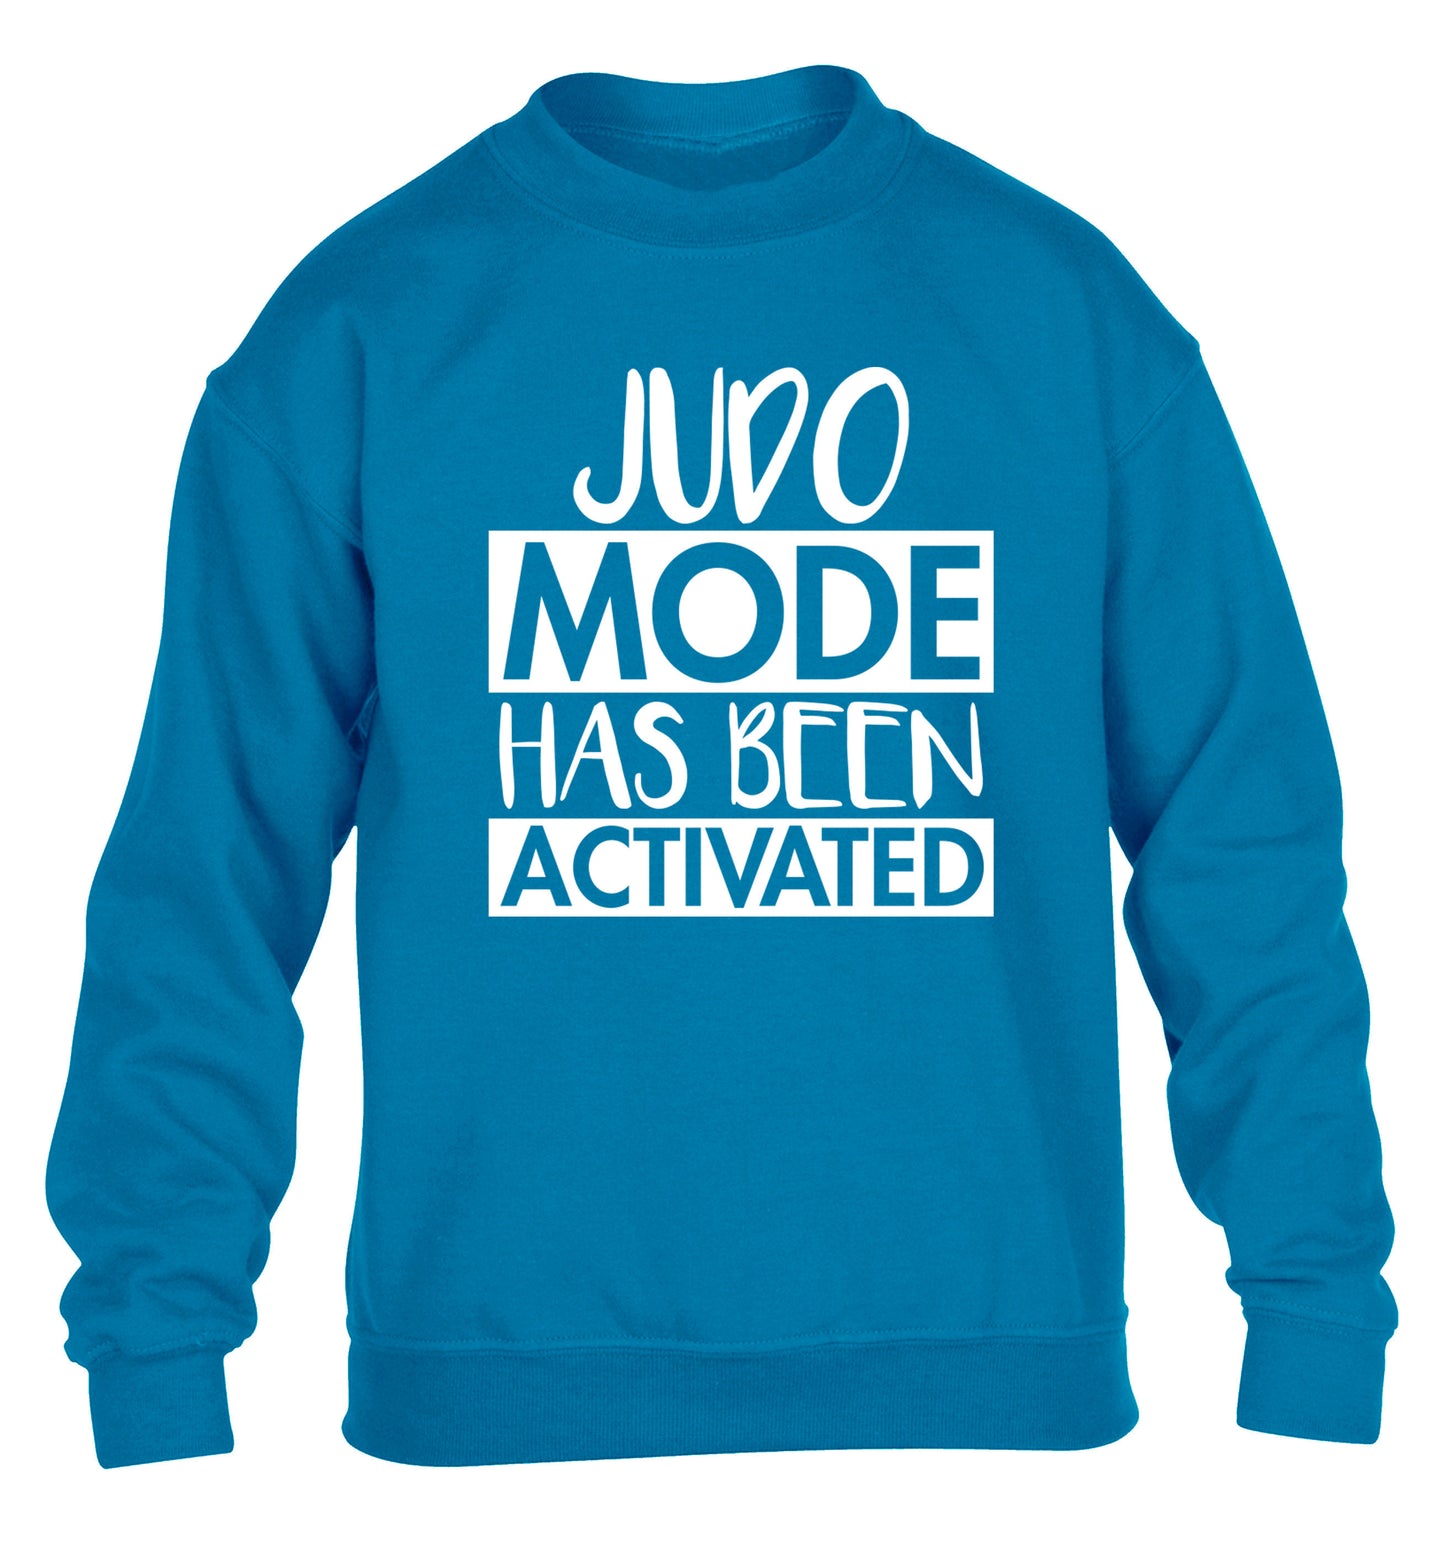 Judo mode activated children's blue sweater 12-14 Years